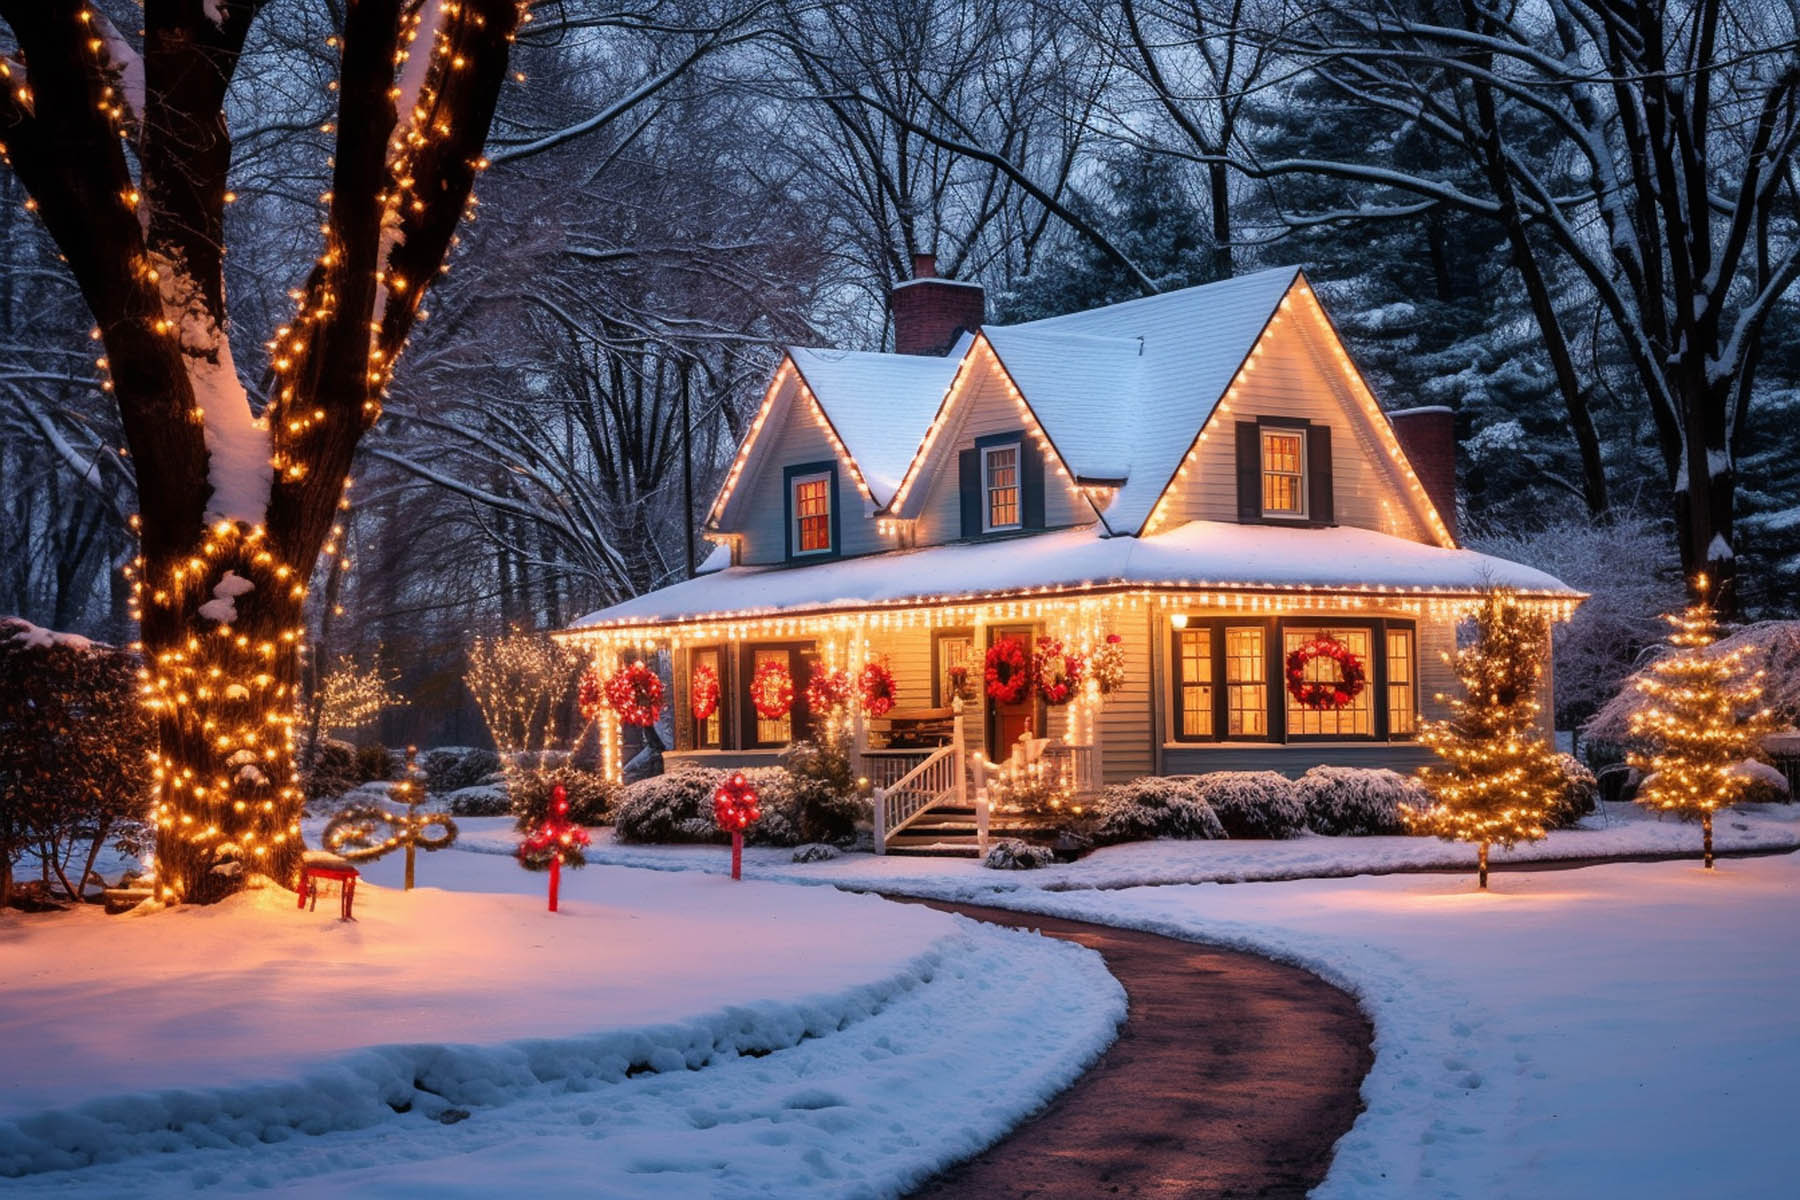 Guide to Choosing the Best Christmas Light Decorations for Your Home